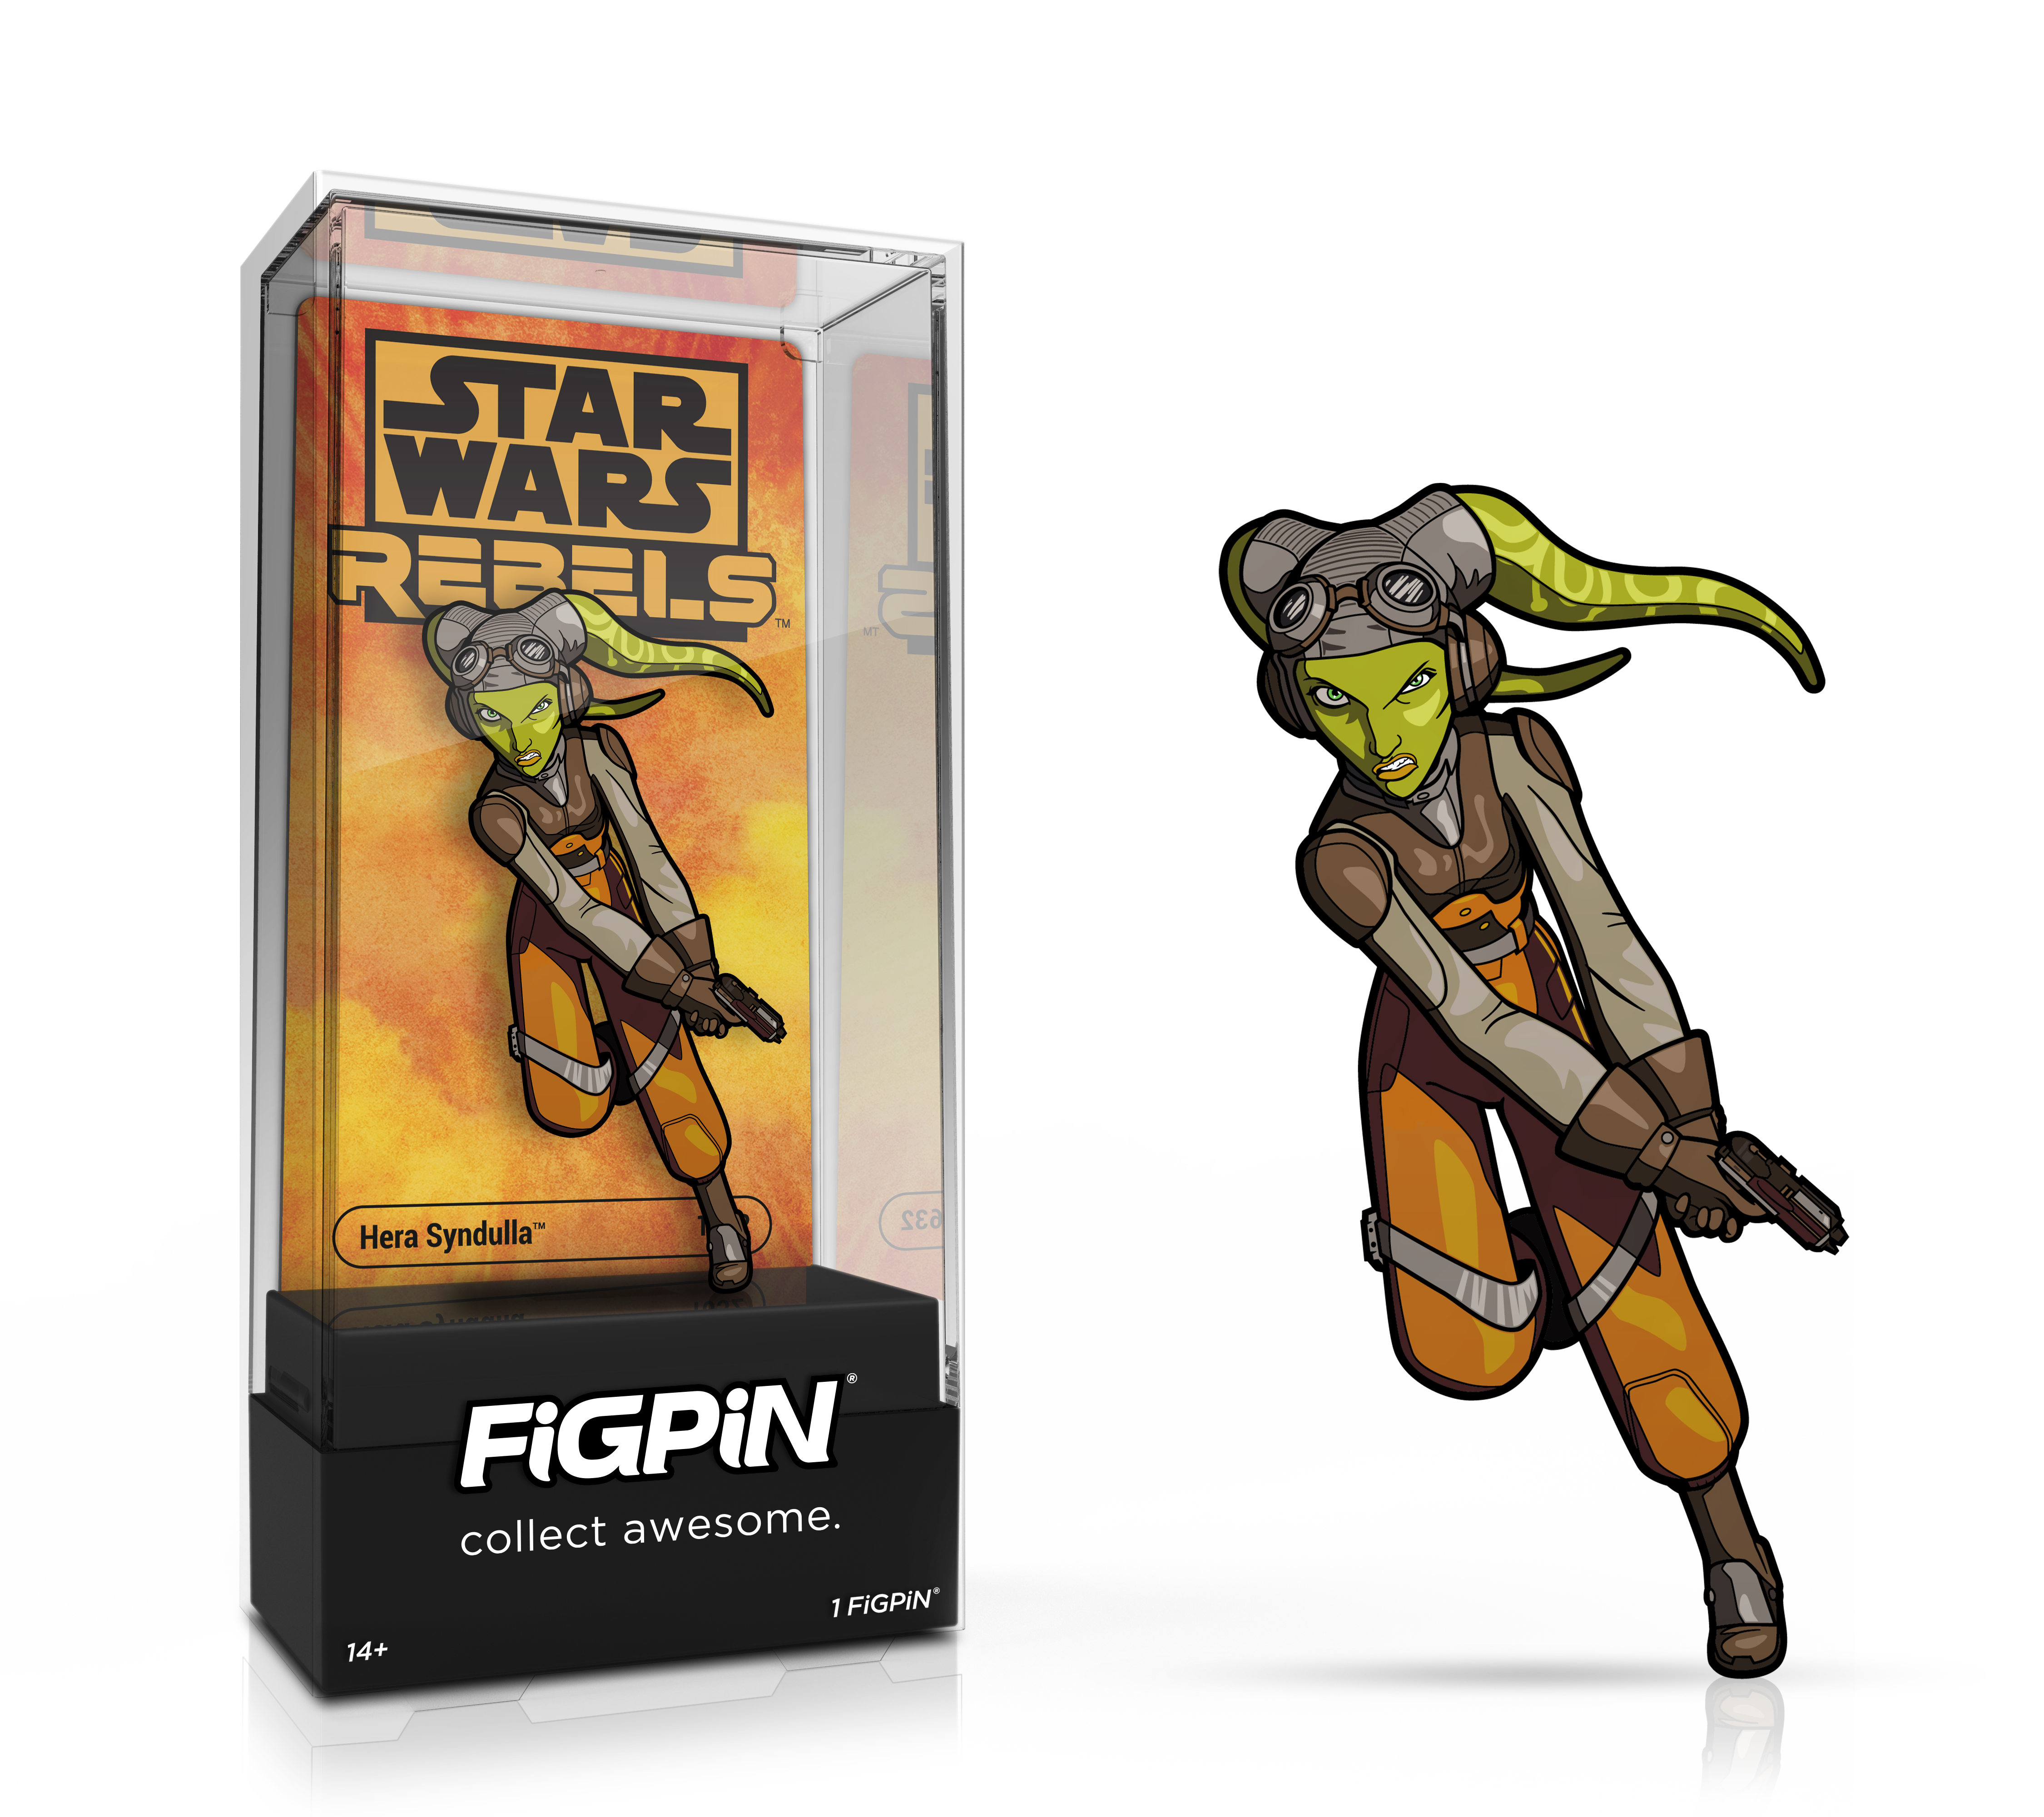 Side by side view of the STAR WARS REBELS Hera Syndulla enamel pin in display case and the art render.